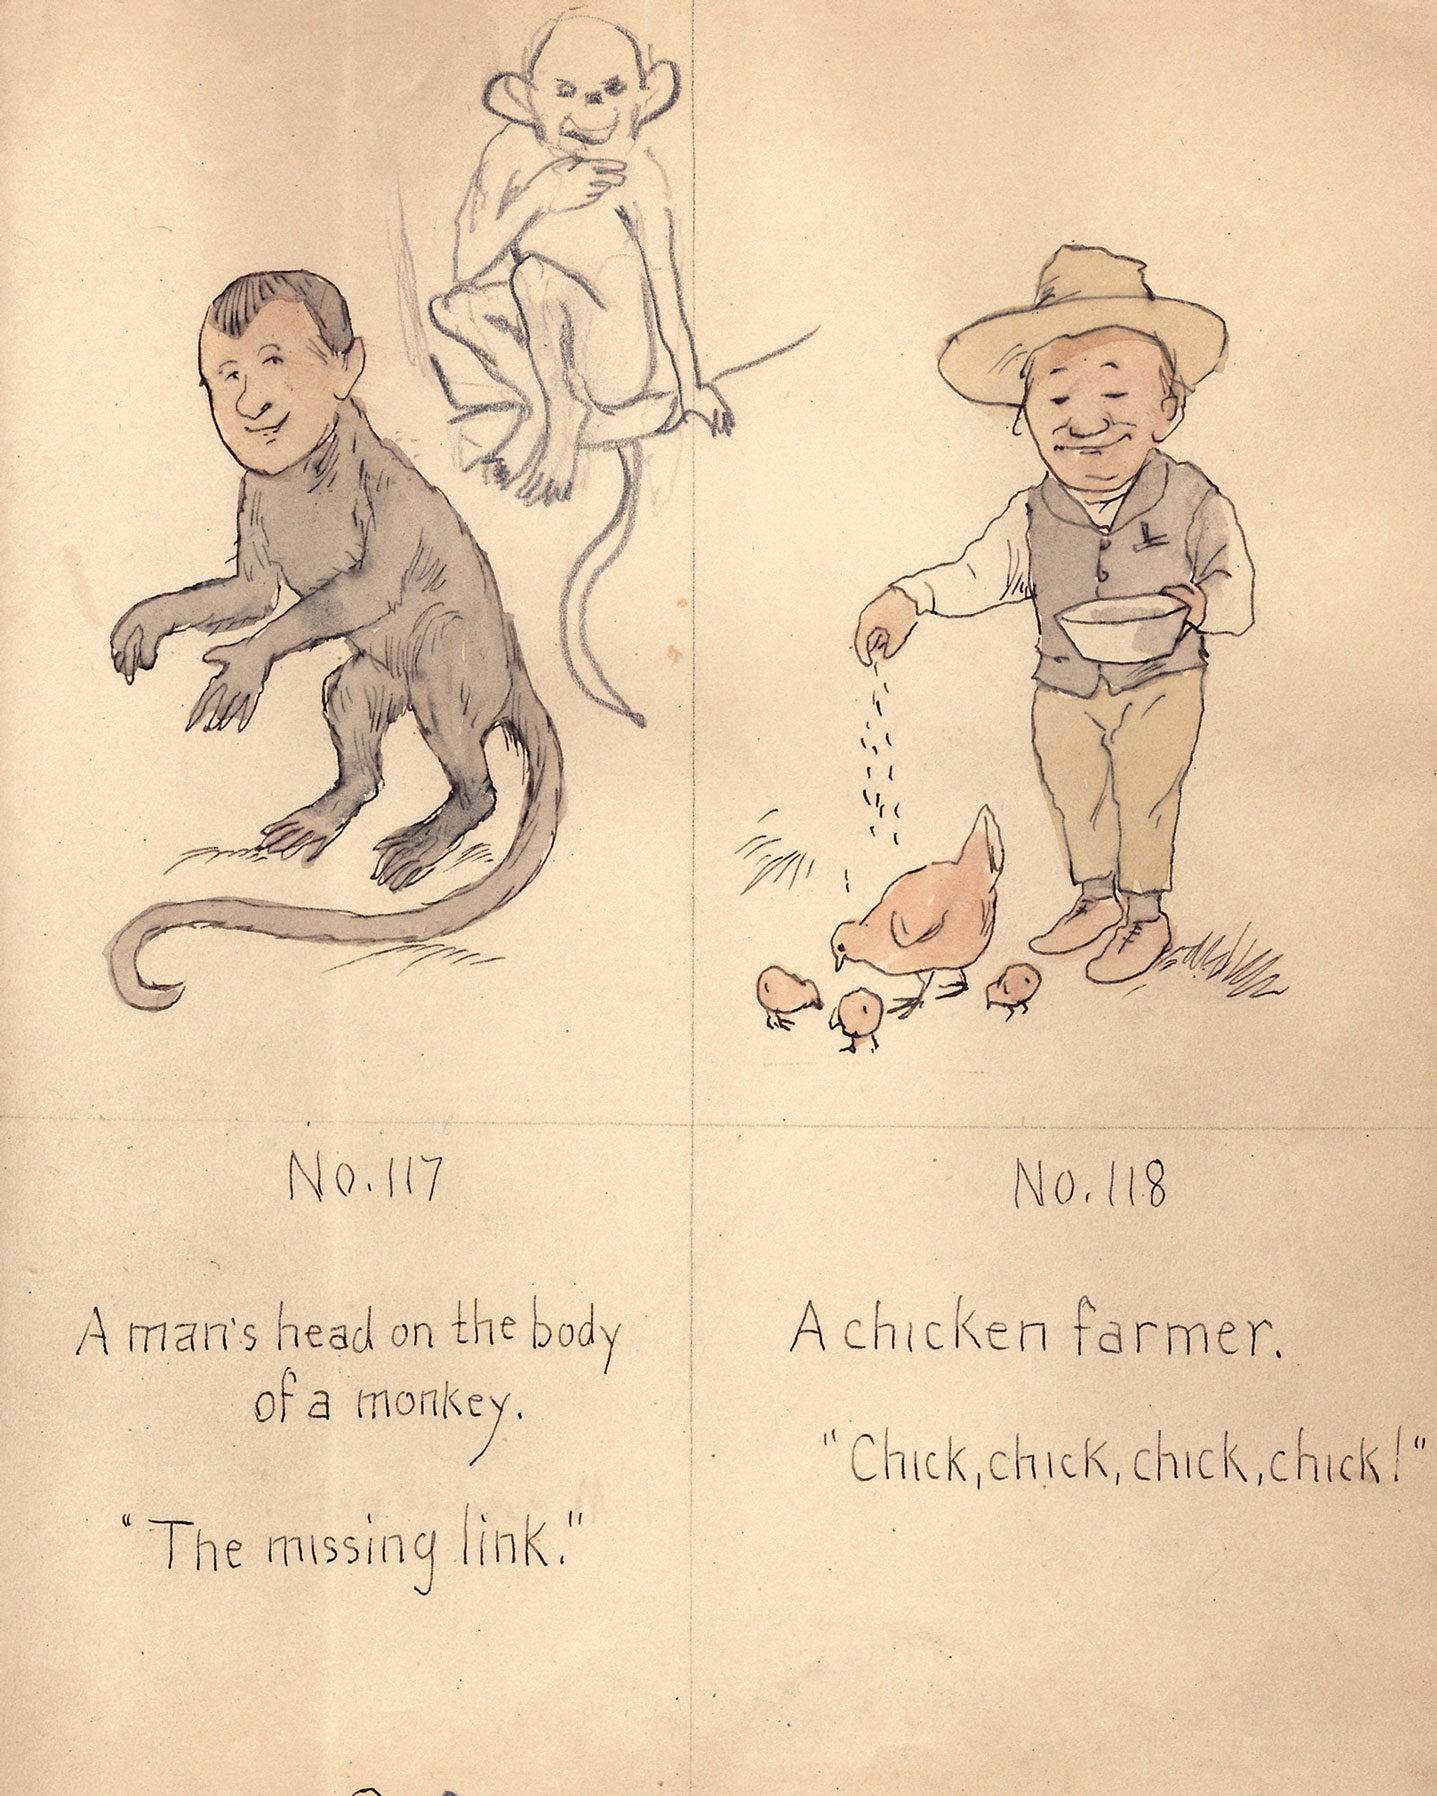 An image circa 1890 from Cassius M. Coolidge's sketchbook, featuring a man's head on a monkey's body and a chicken farmer.